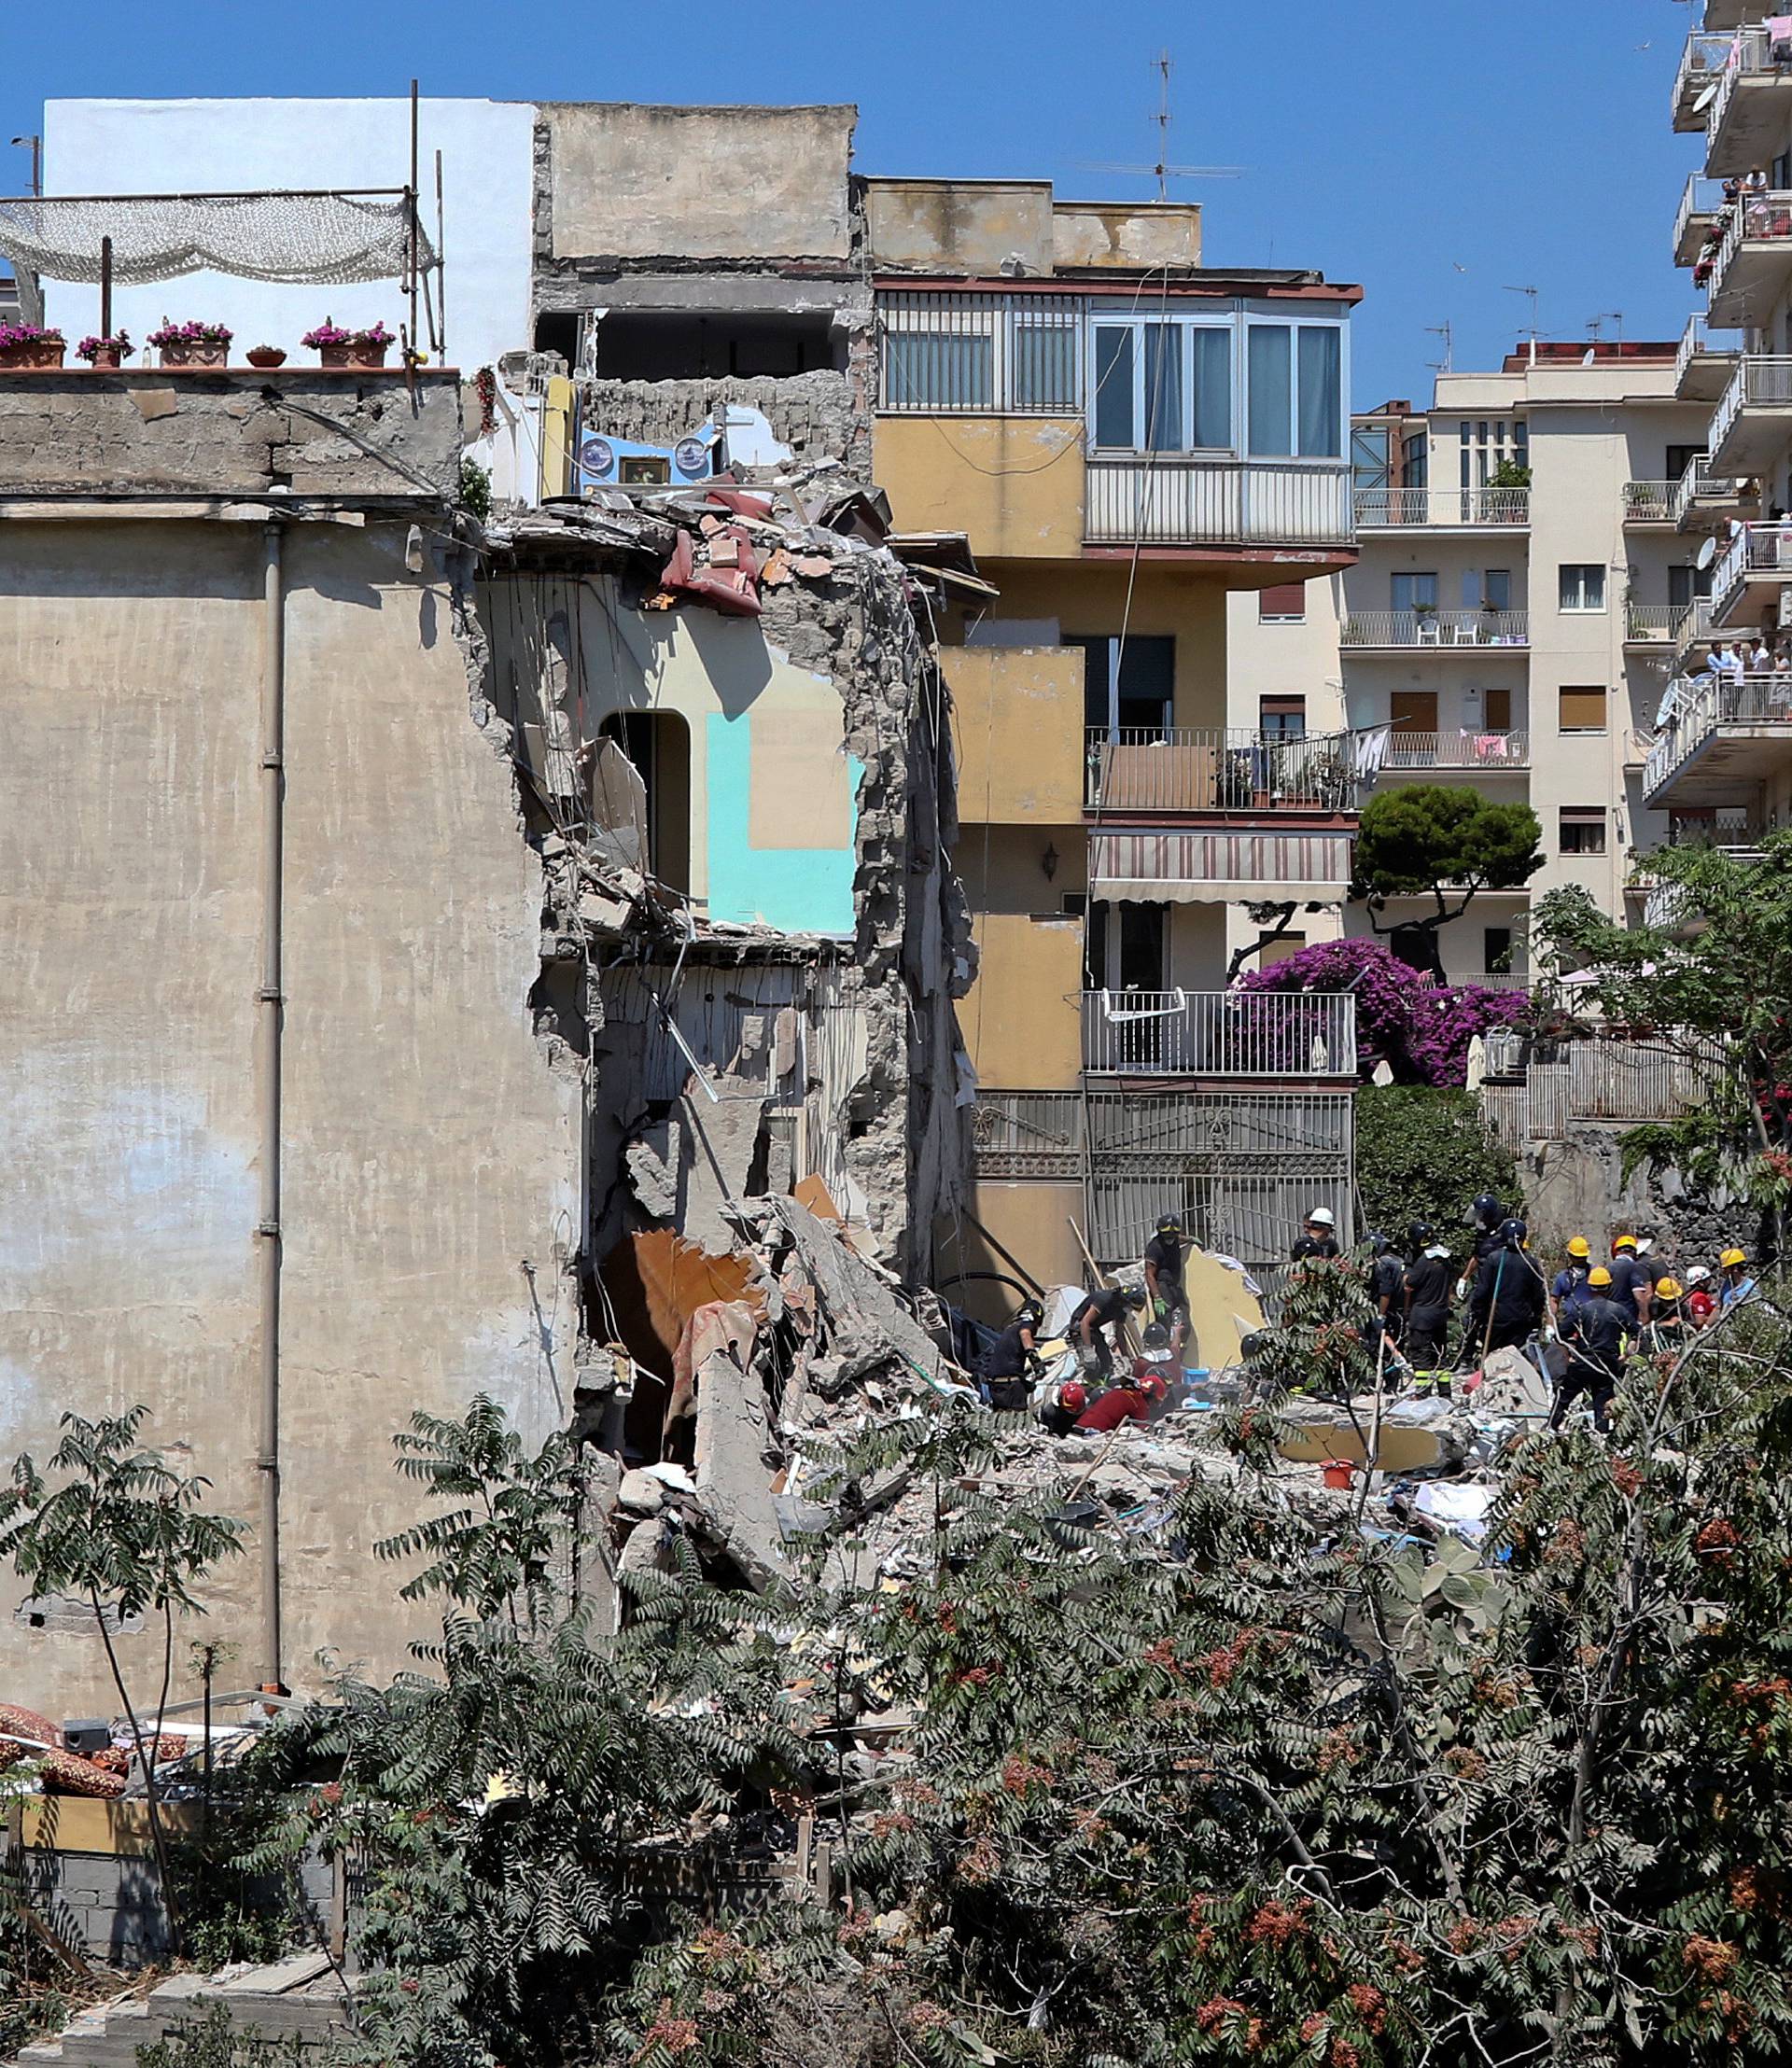 Firefighters work on the site of a collapsed building in Torre Annunziata